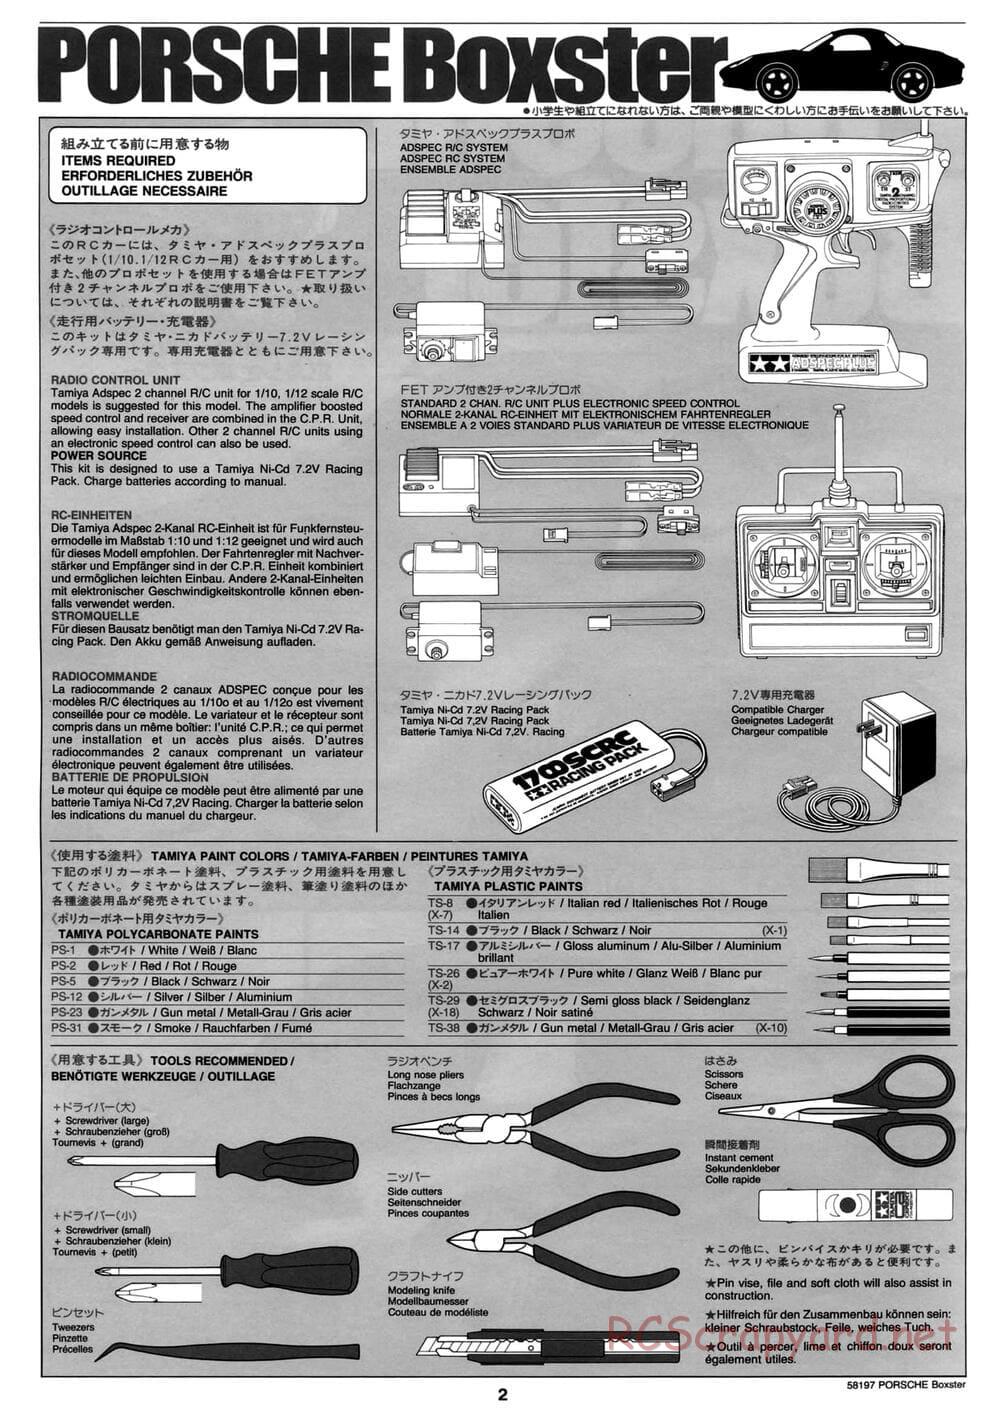 Tamiya - Porsche Boxster - M02L Chassis - Manual - Page 2